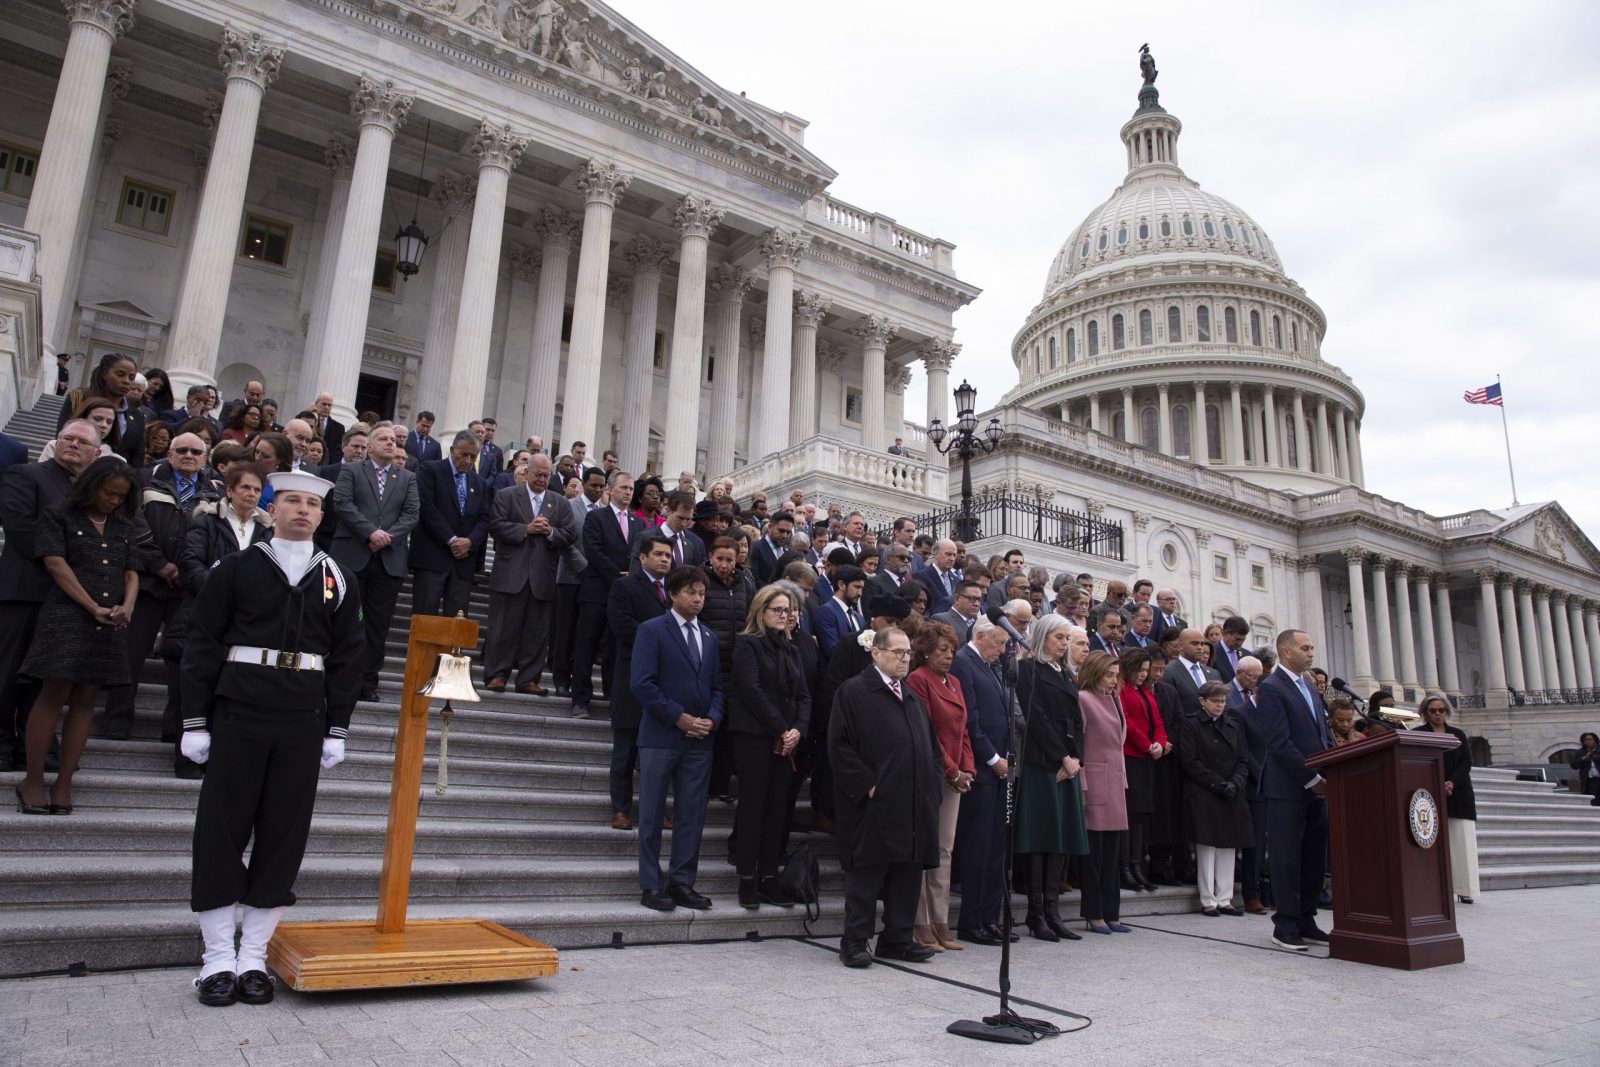 epa10392701 Members of Congress and families of fallen US Capitol Police observe a moment of silence during a ceremony to observe the second anniversary of the 06 January attack on the United States Capitol, at the East Front steps of the US Capitol in Washington, DC, USA, 06 January 2023. The second anniversary of the attack by insurrections occurs weeks after the House Select Committee to Investigate the January 6 Attack on the Capitol referred former US President Donald J. Trump and others to the US Justice Department for criminal investigations.  EPA/MICHAEL REYNOLDS